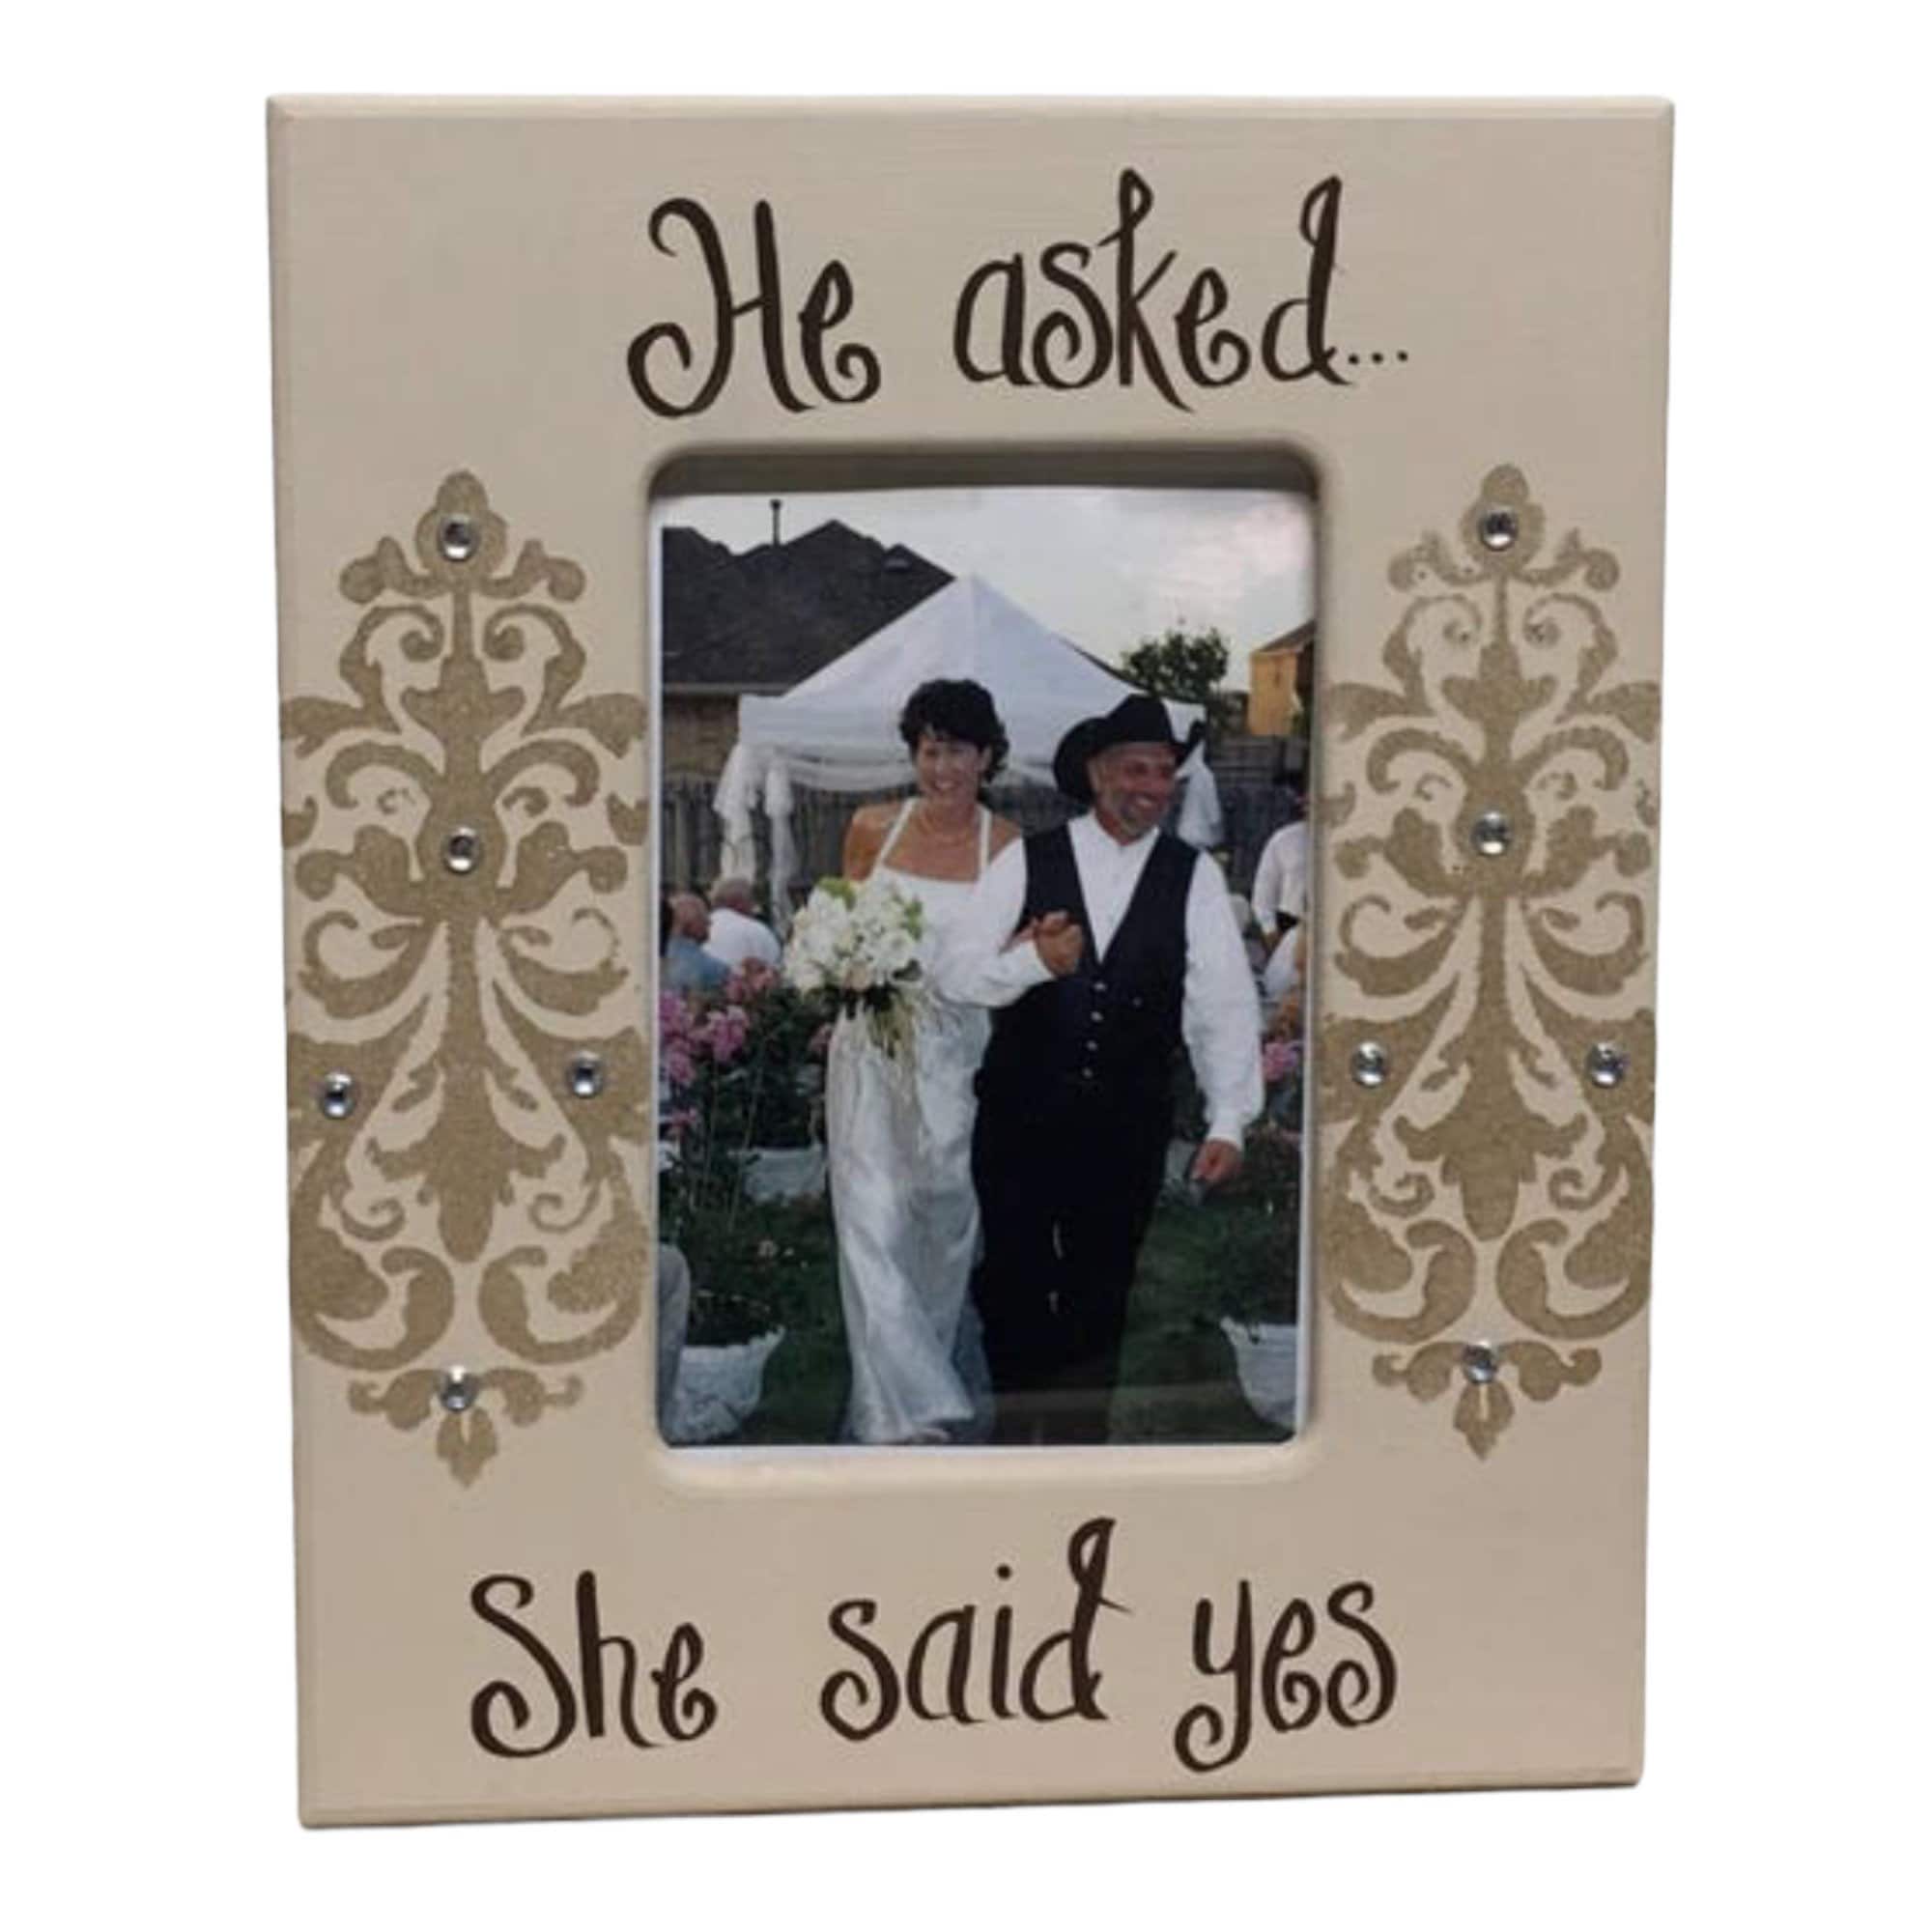 4x6 Beige and Champagne Gold Photo Frame with Burlap Jeweled Bow He asked...She said yes personalized at the bottom